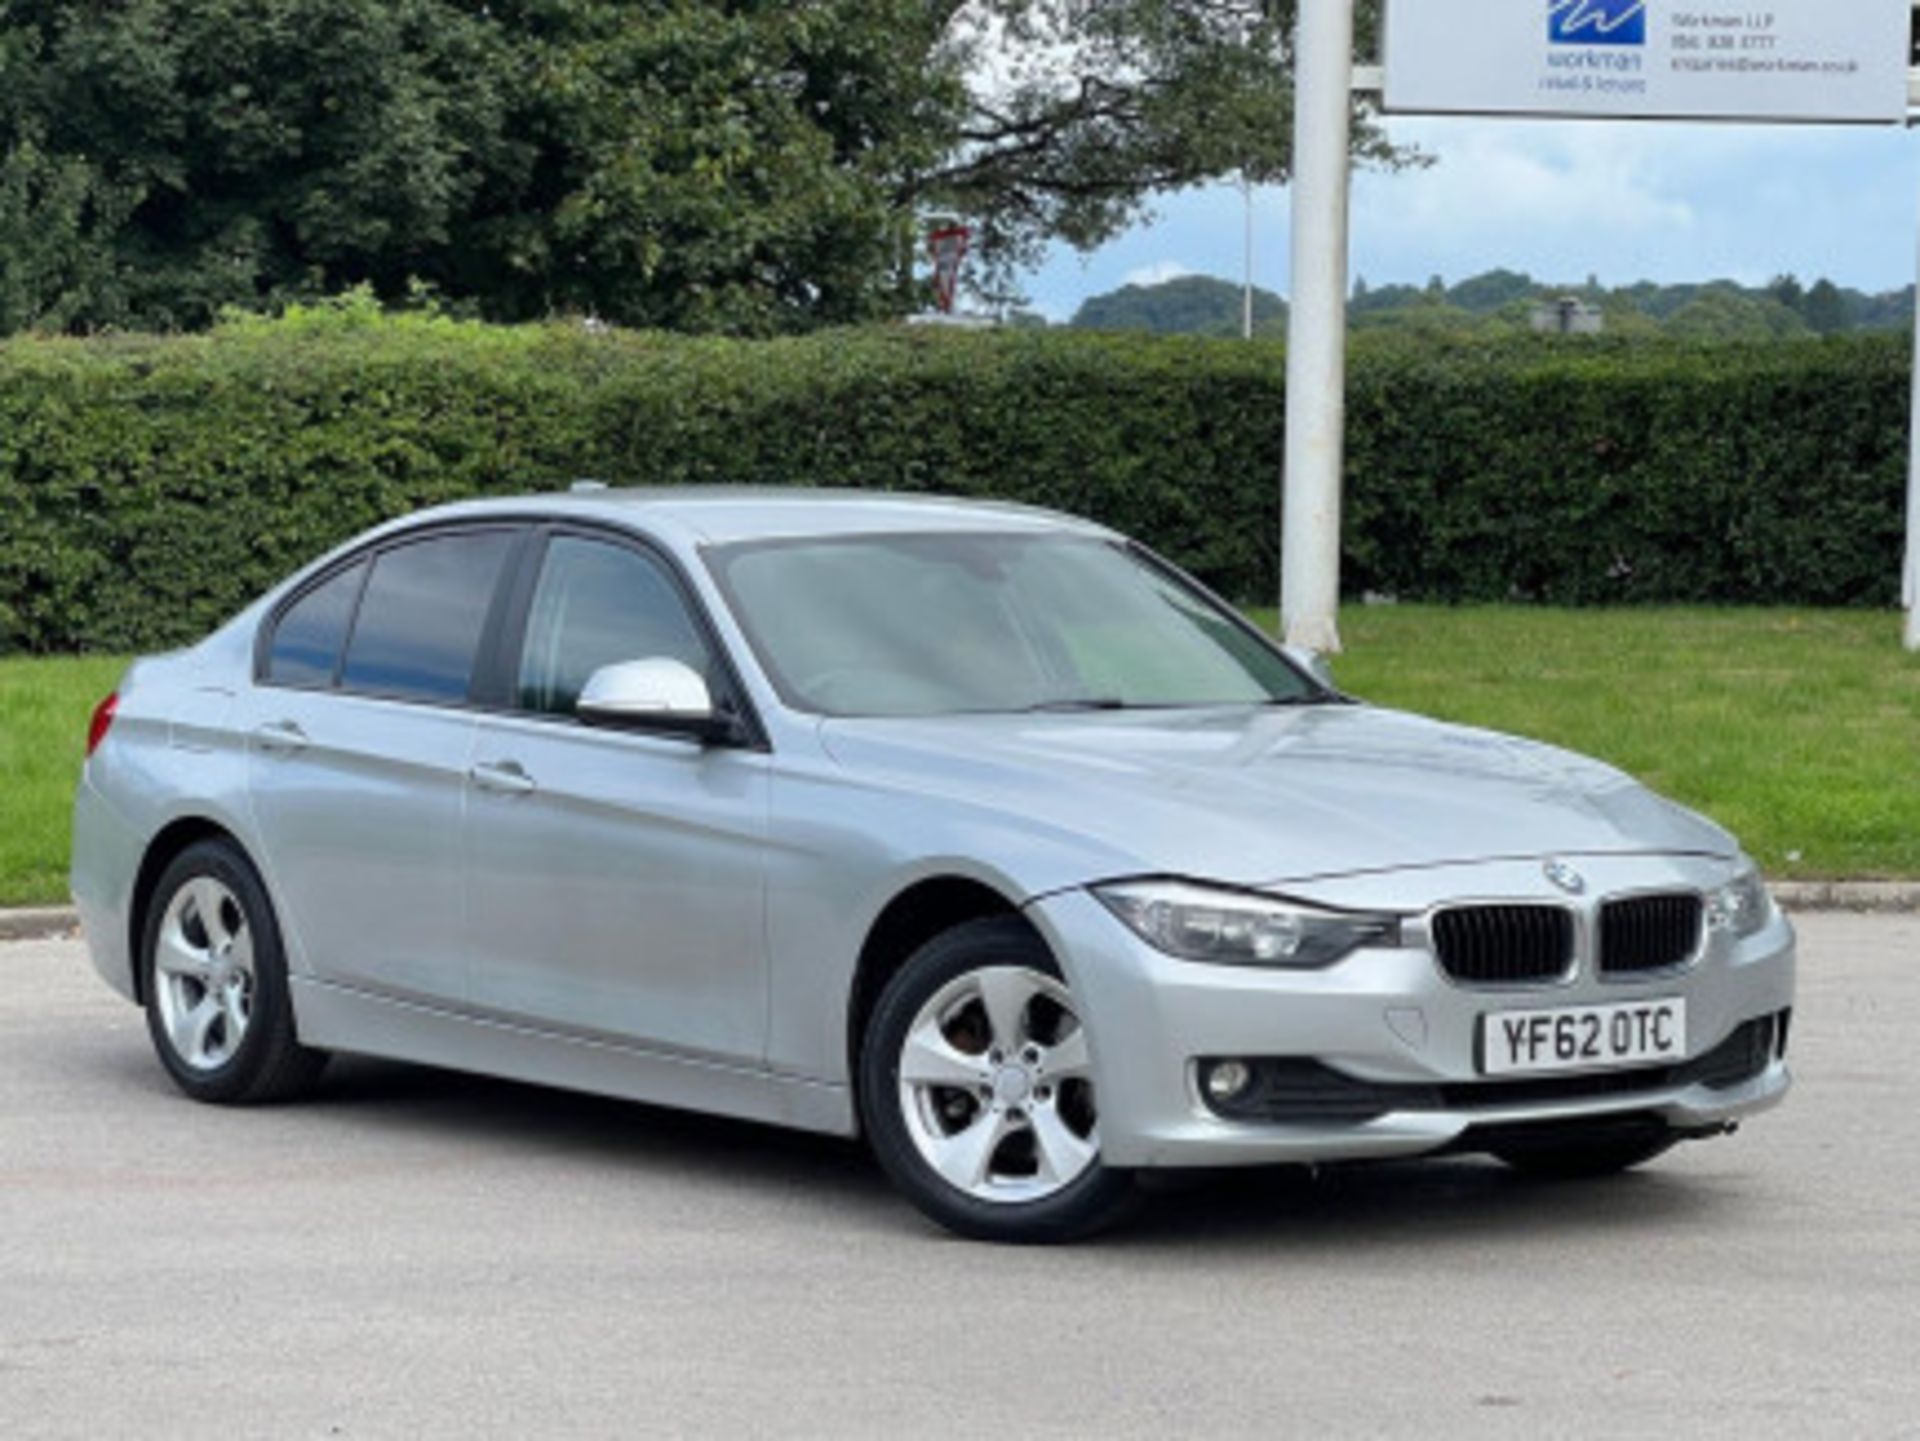 BMW 3 SERIES 2.0 DIESEL ED START STOP - A WELL-MAINTAINED GEM >>--NO VAT ON HAMMER--<< - Image 124 of 229